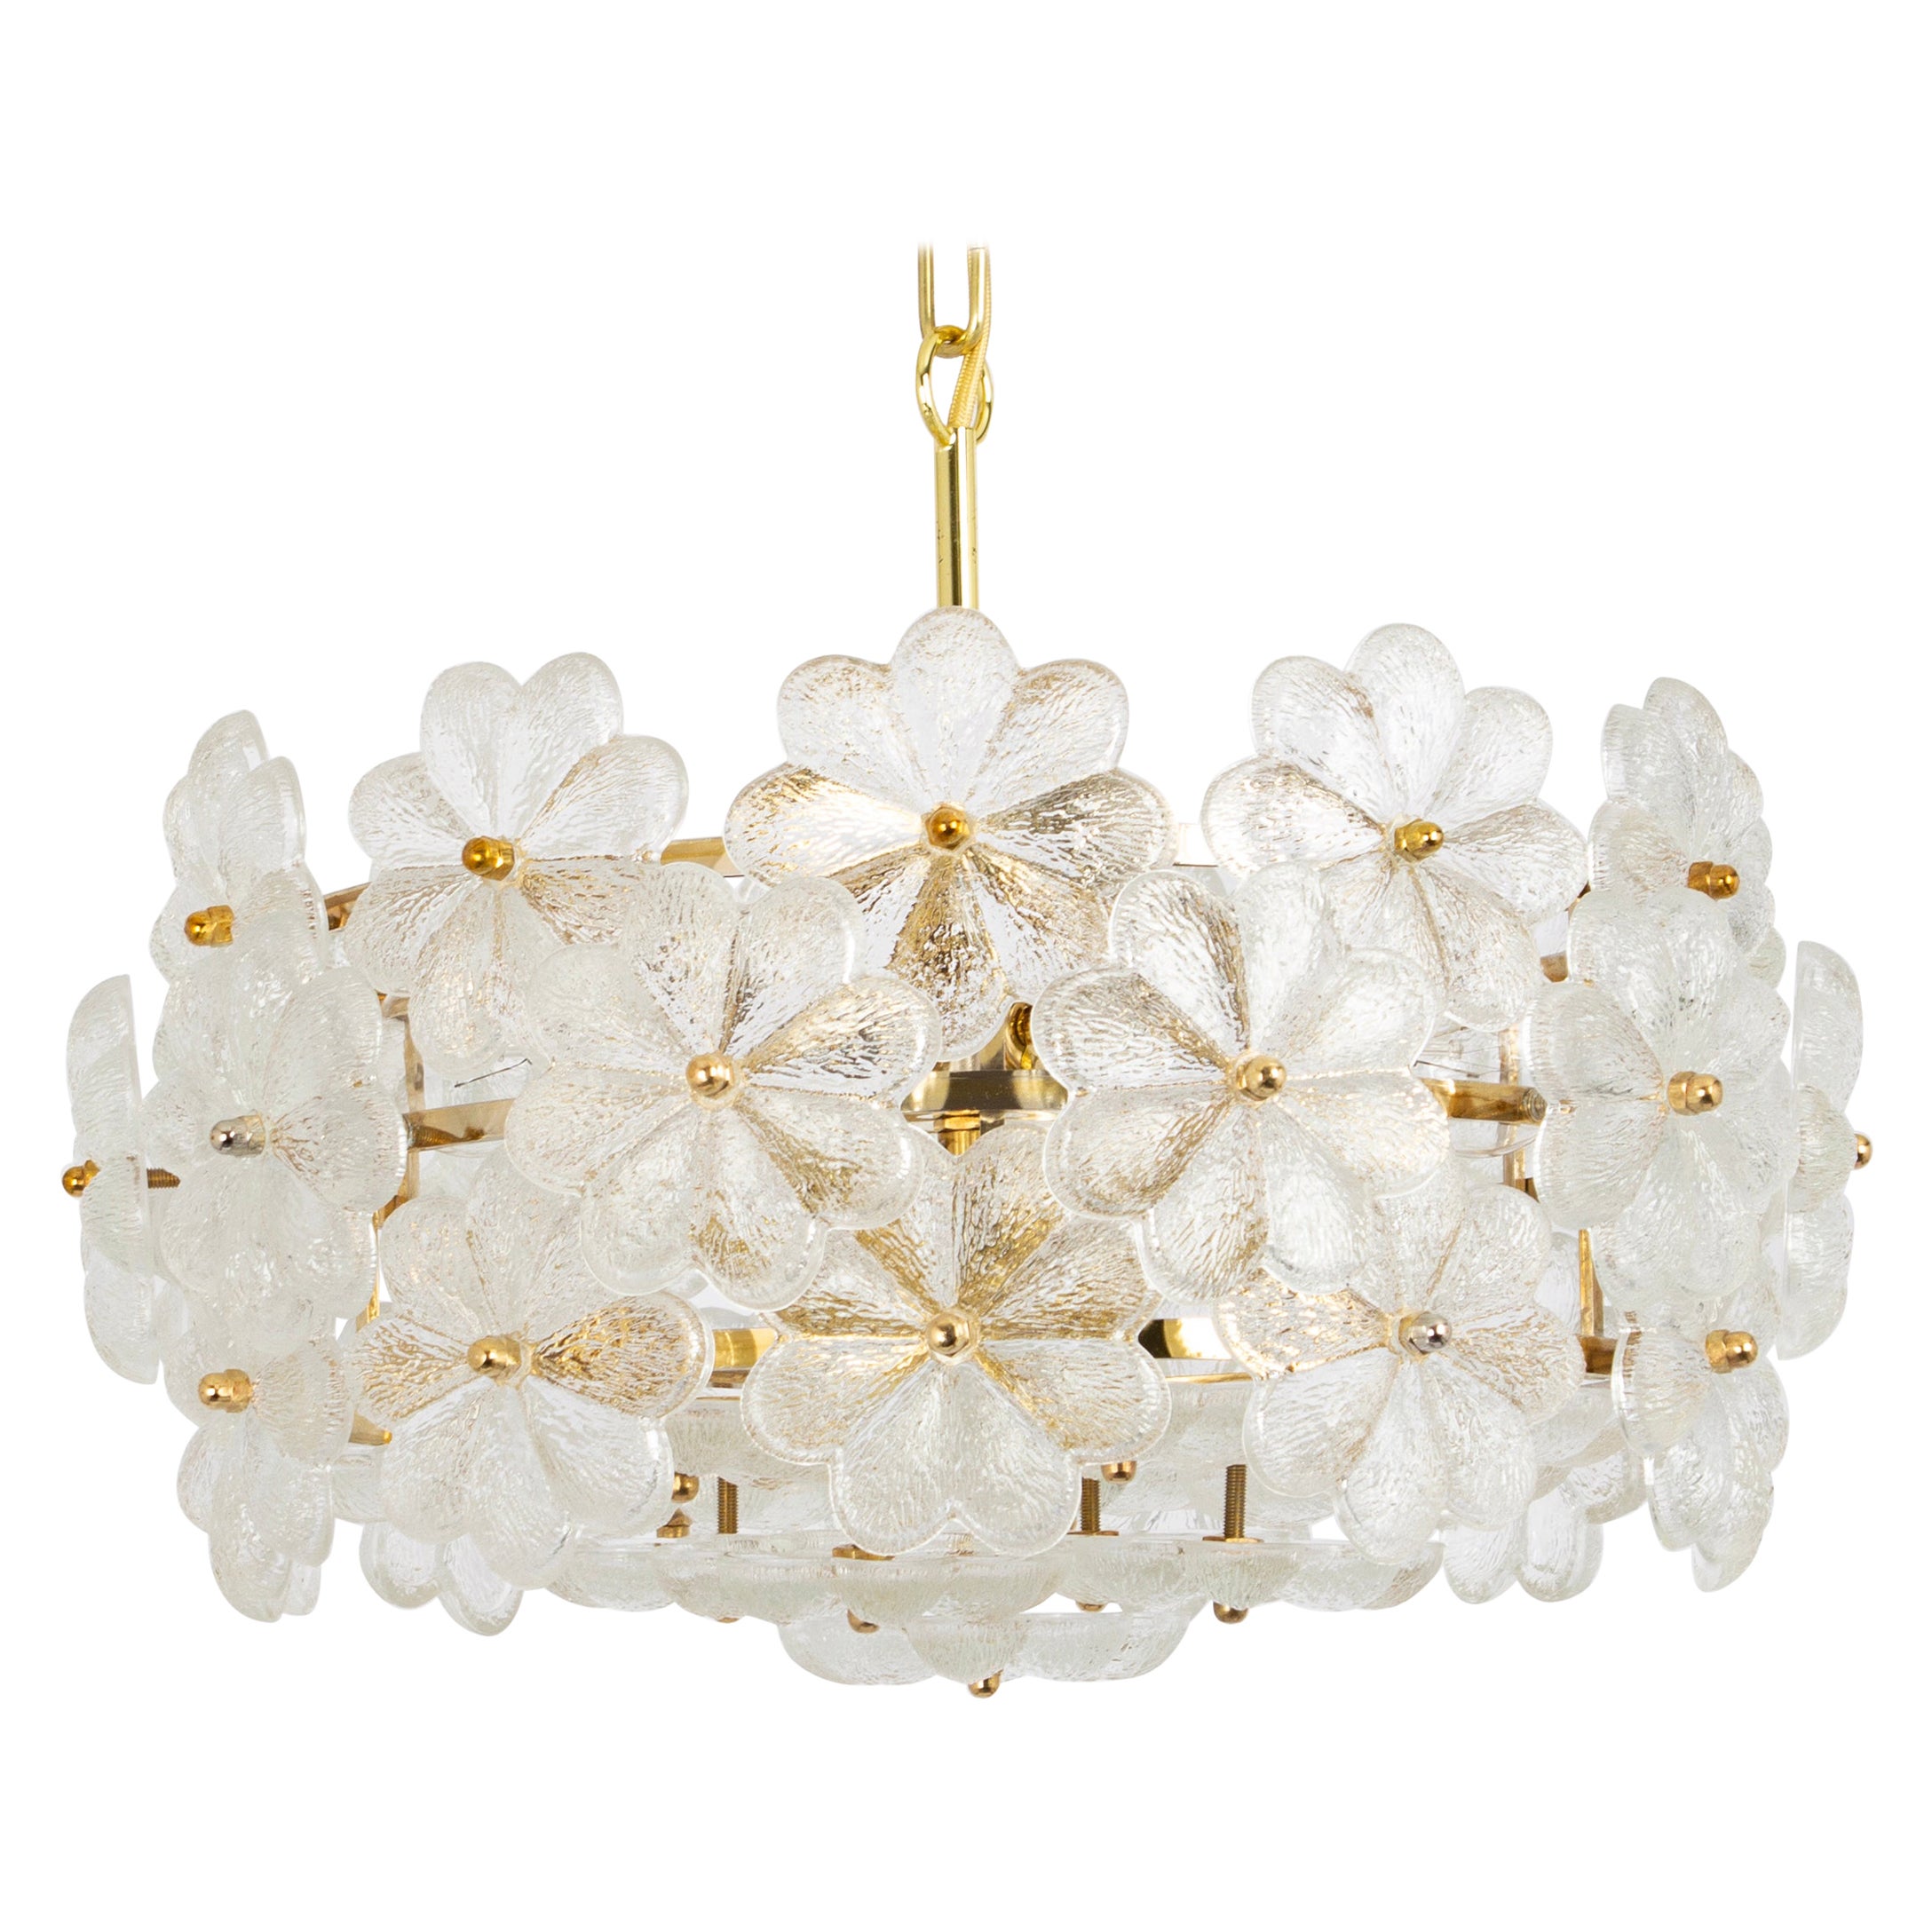 Stunning Petite Murano Glass Chandelier by Ernst Palme, Germany, 1970s